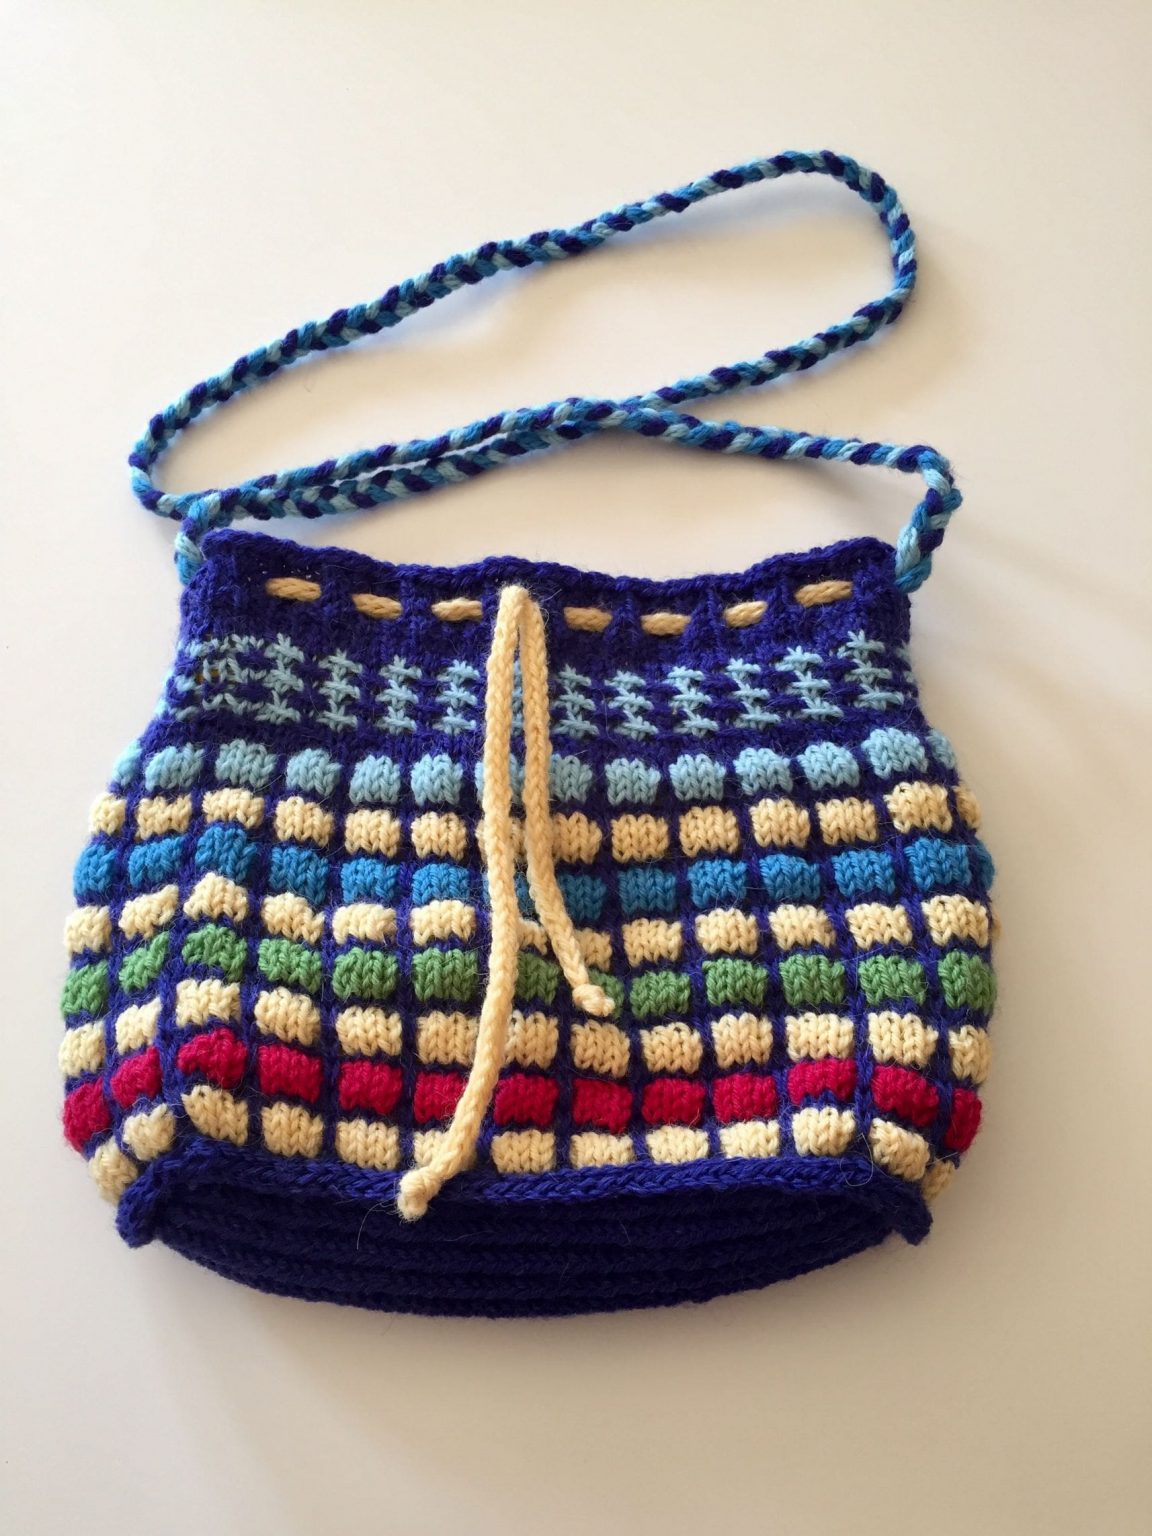 Graduate Story: Patricia McCarthy - Knitting | School of Stitched Textiles